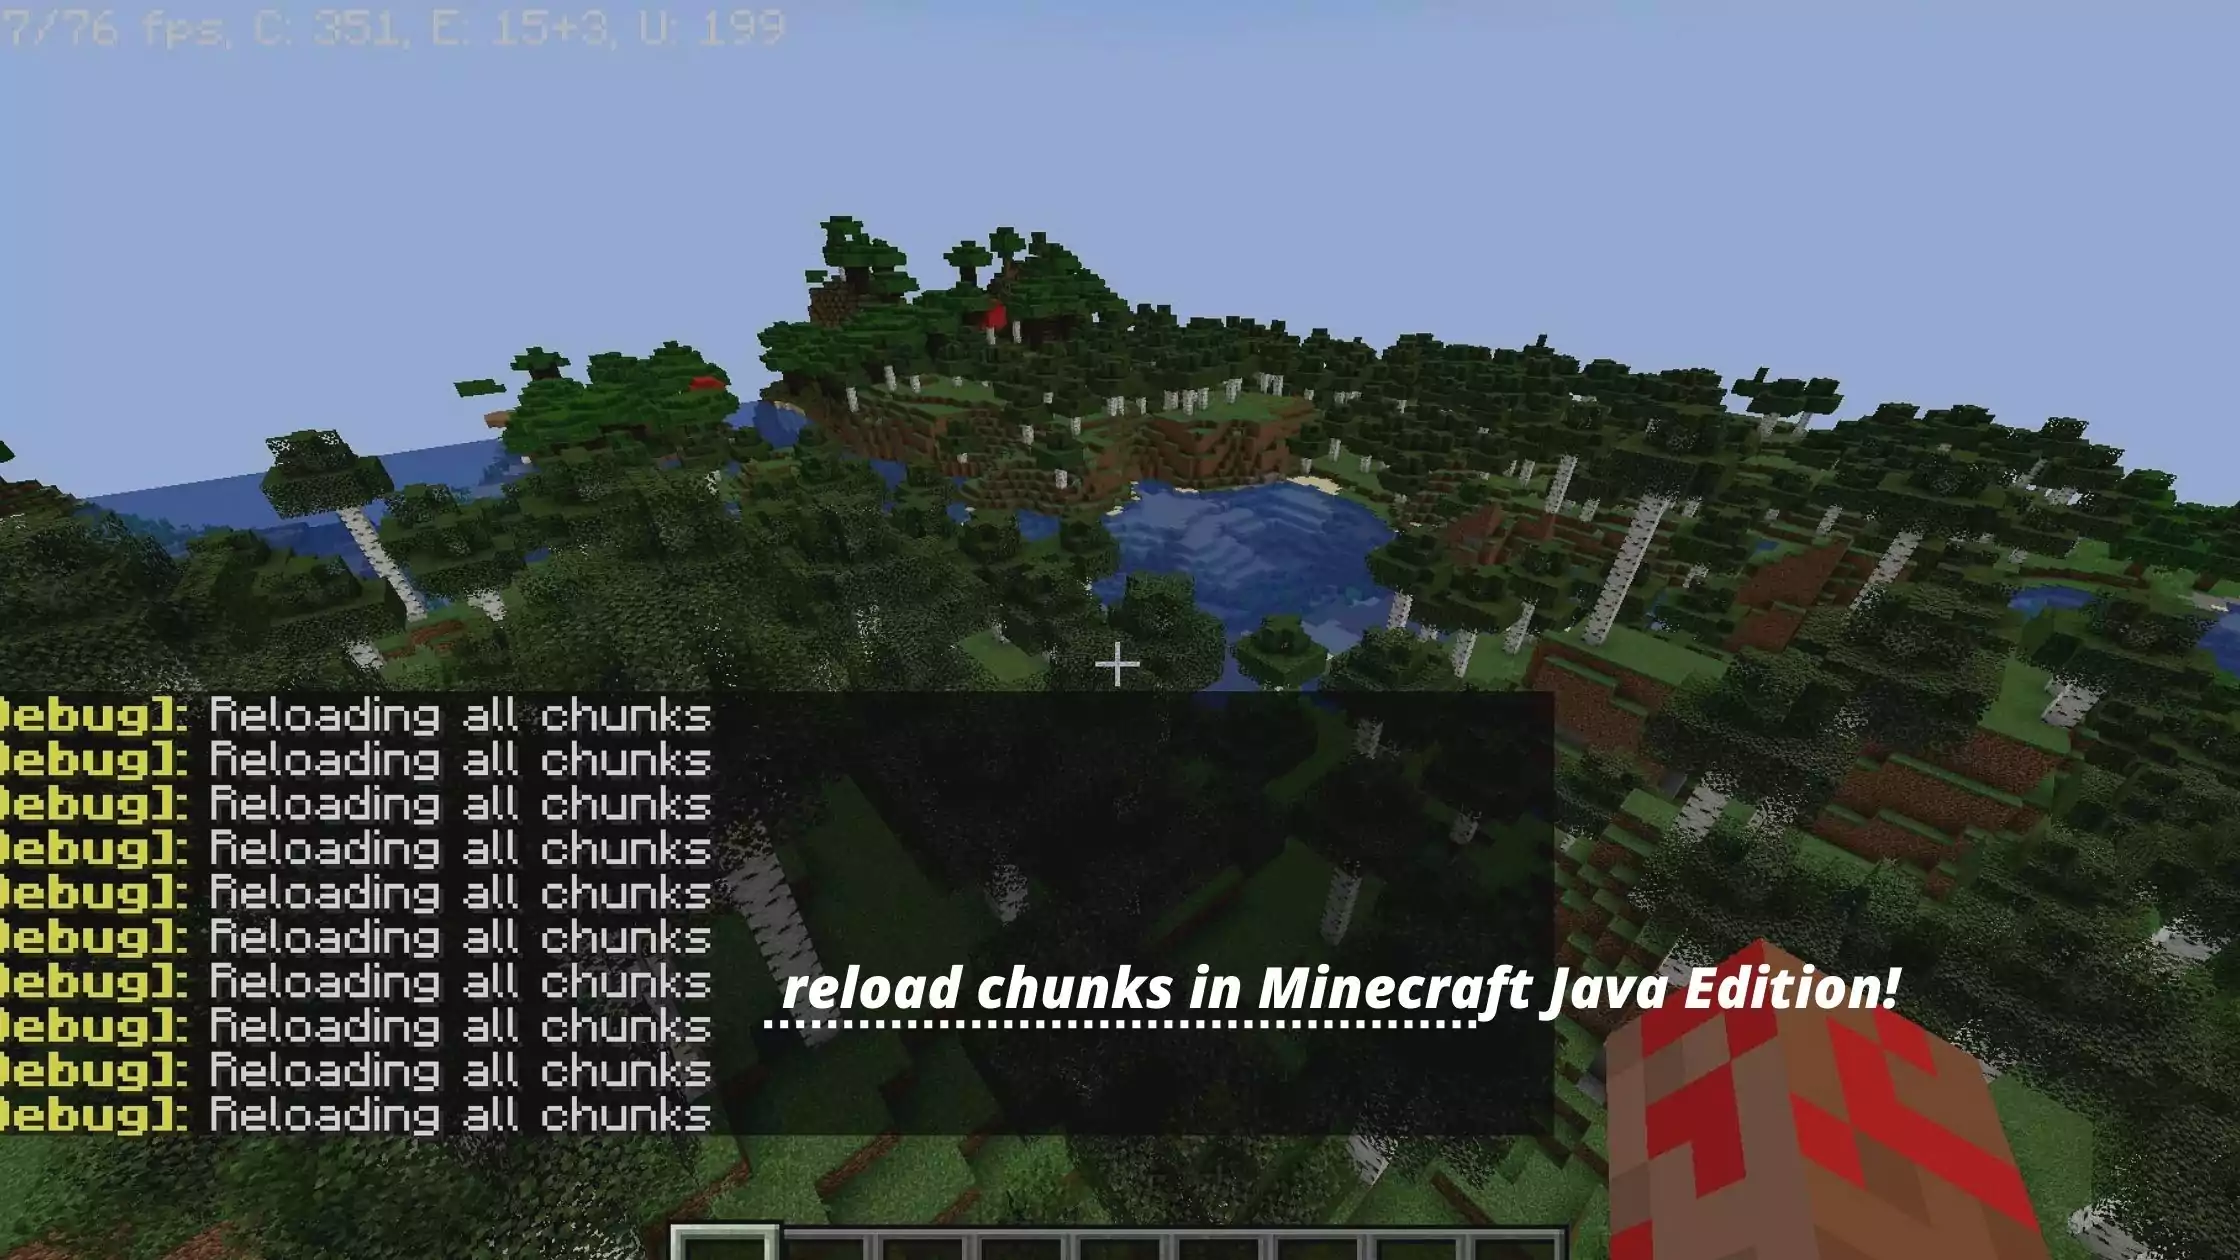 How To reload chunks in Minecraft Java Edition